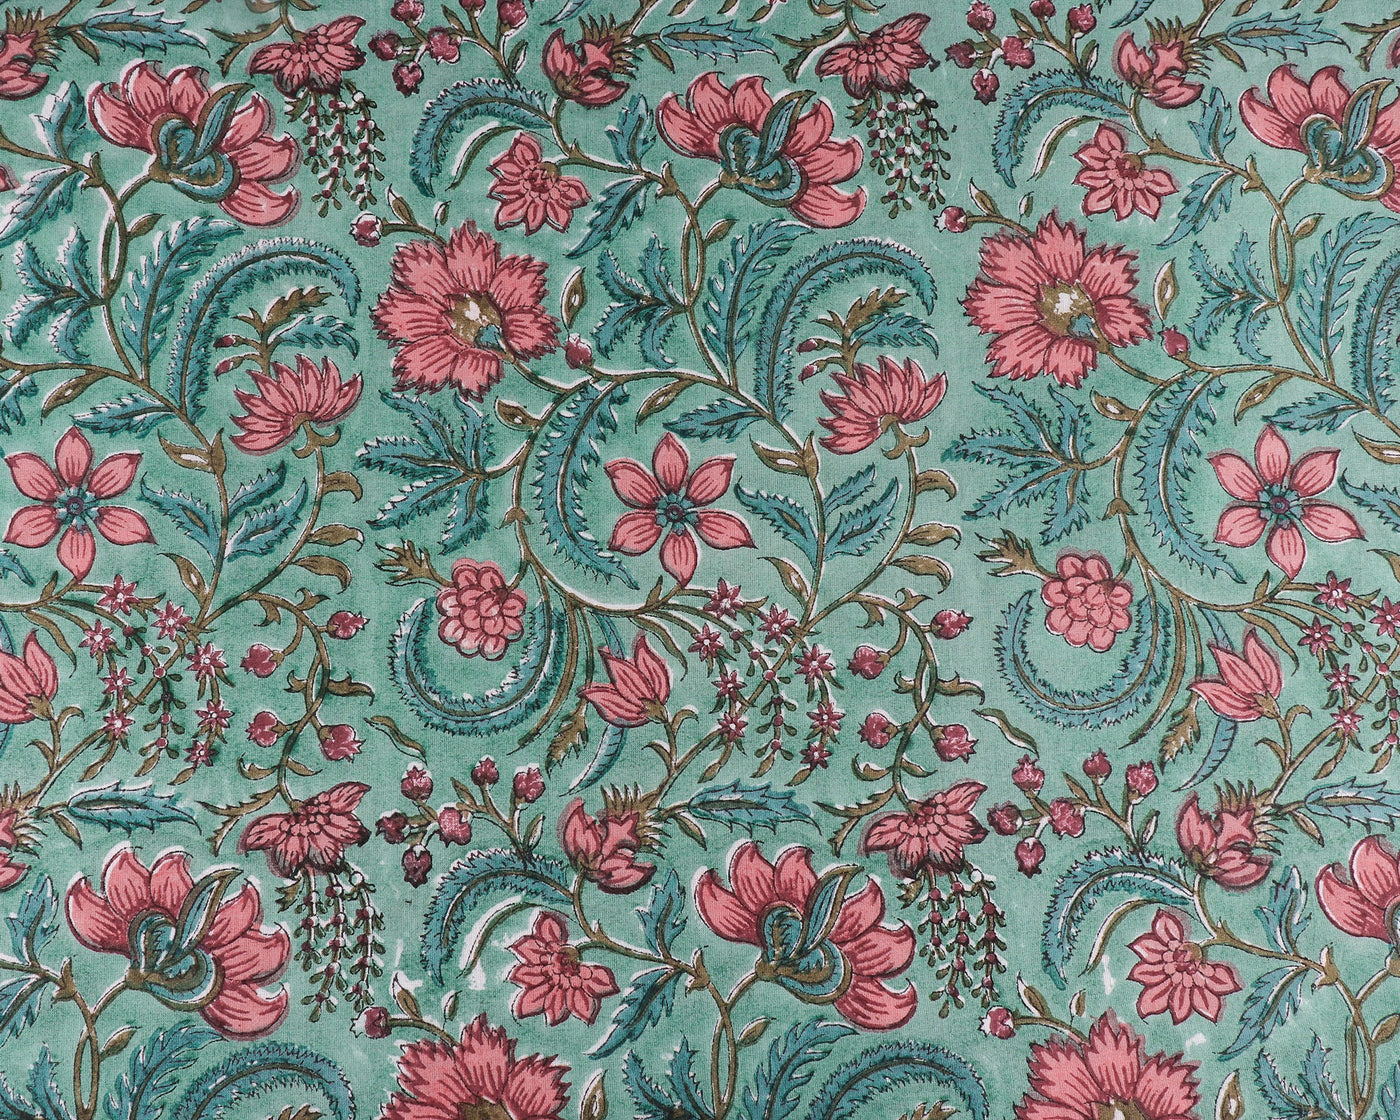 Turquoise Green, Light Coral Indian Floral Hand Block Printed 100% Pure Cotton Cloth, Fabric by the yard, Womens clothing Curtains Pillows